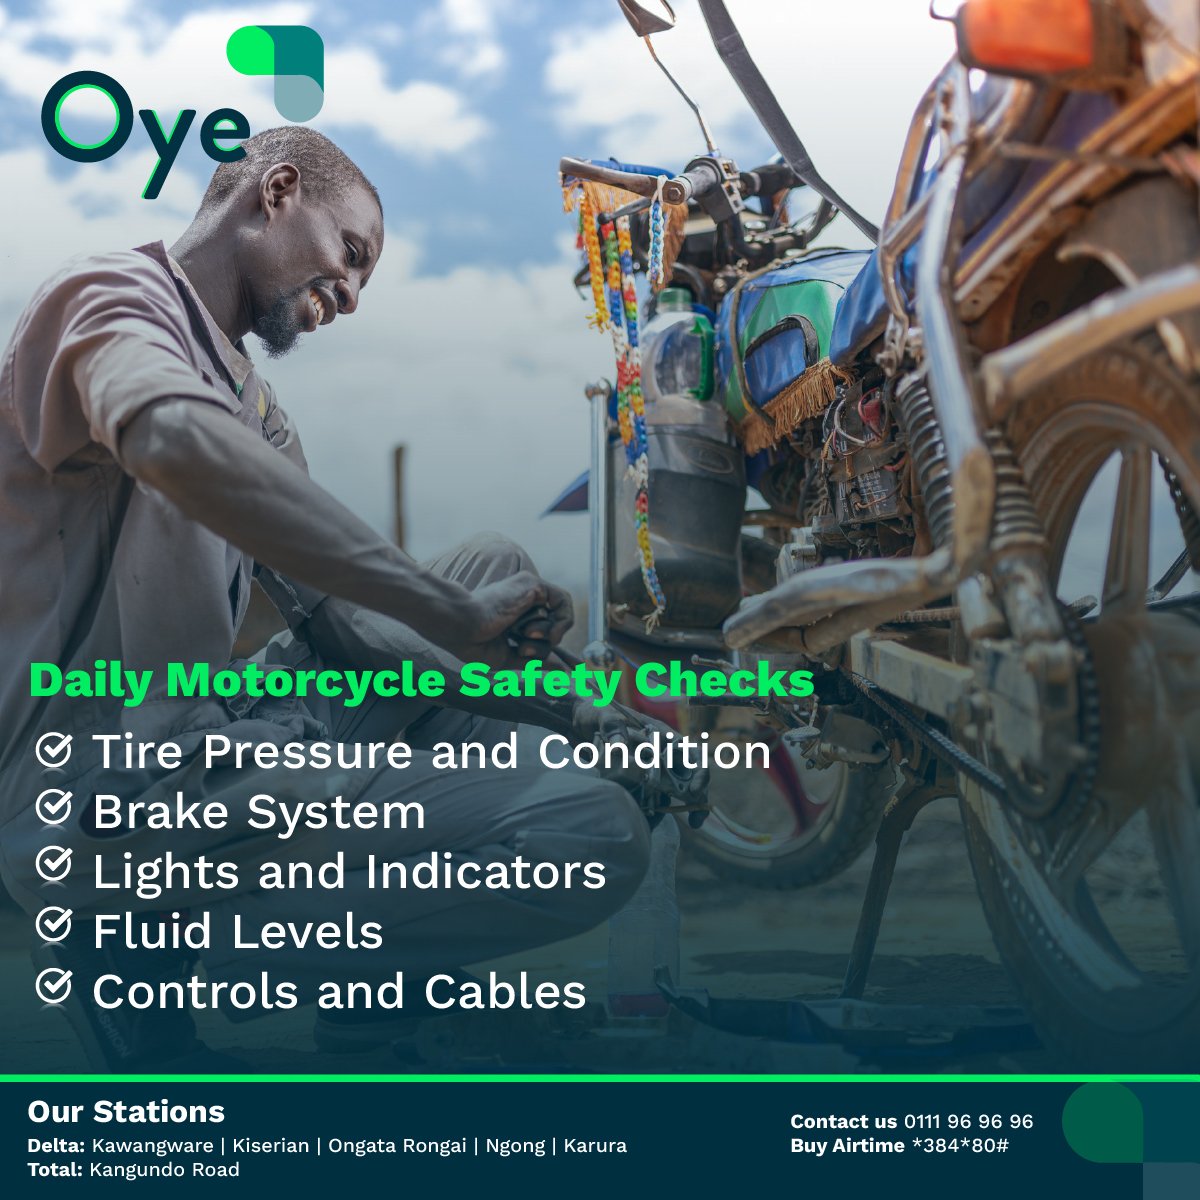 This week @oyeapp_ke will be sharing some #Key #Critical #Motorcycle #safety #Practices that will help create awareness for Motorcycle Taxi Drivers to prevent the number of road #accidents & #fatalities we incur in #Kenya every year. #OYEKenya #MotorcycleSafetyAwareness #NTSA